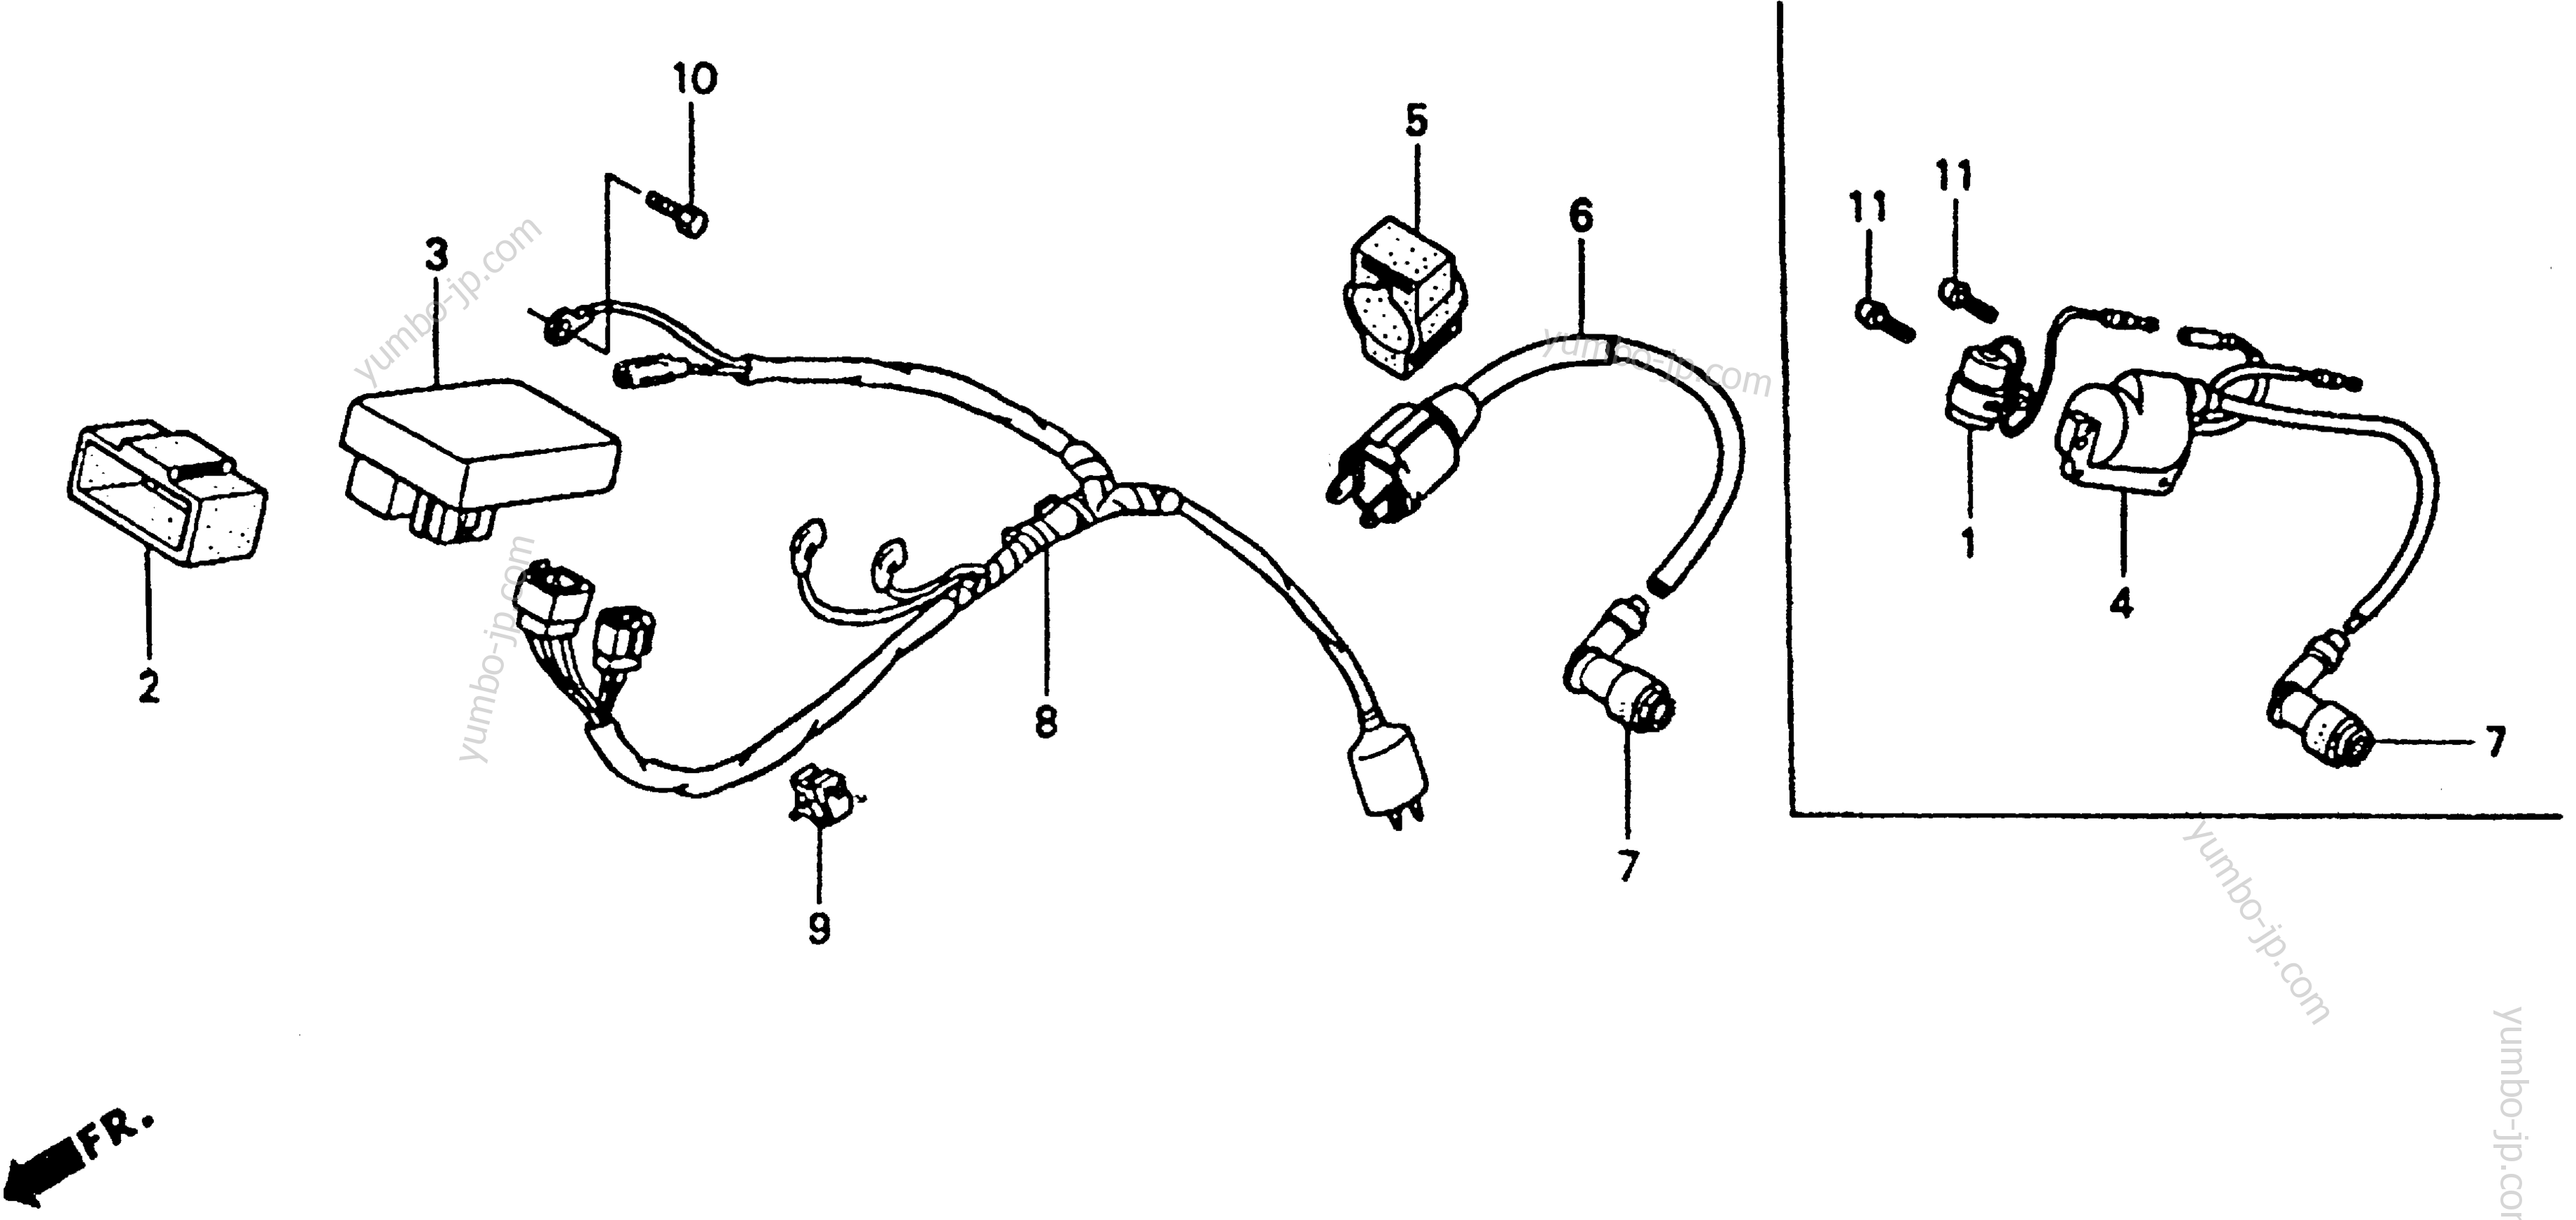 WIRE HARNESS for motorcycles HONDA XR80R A 1986 year